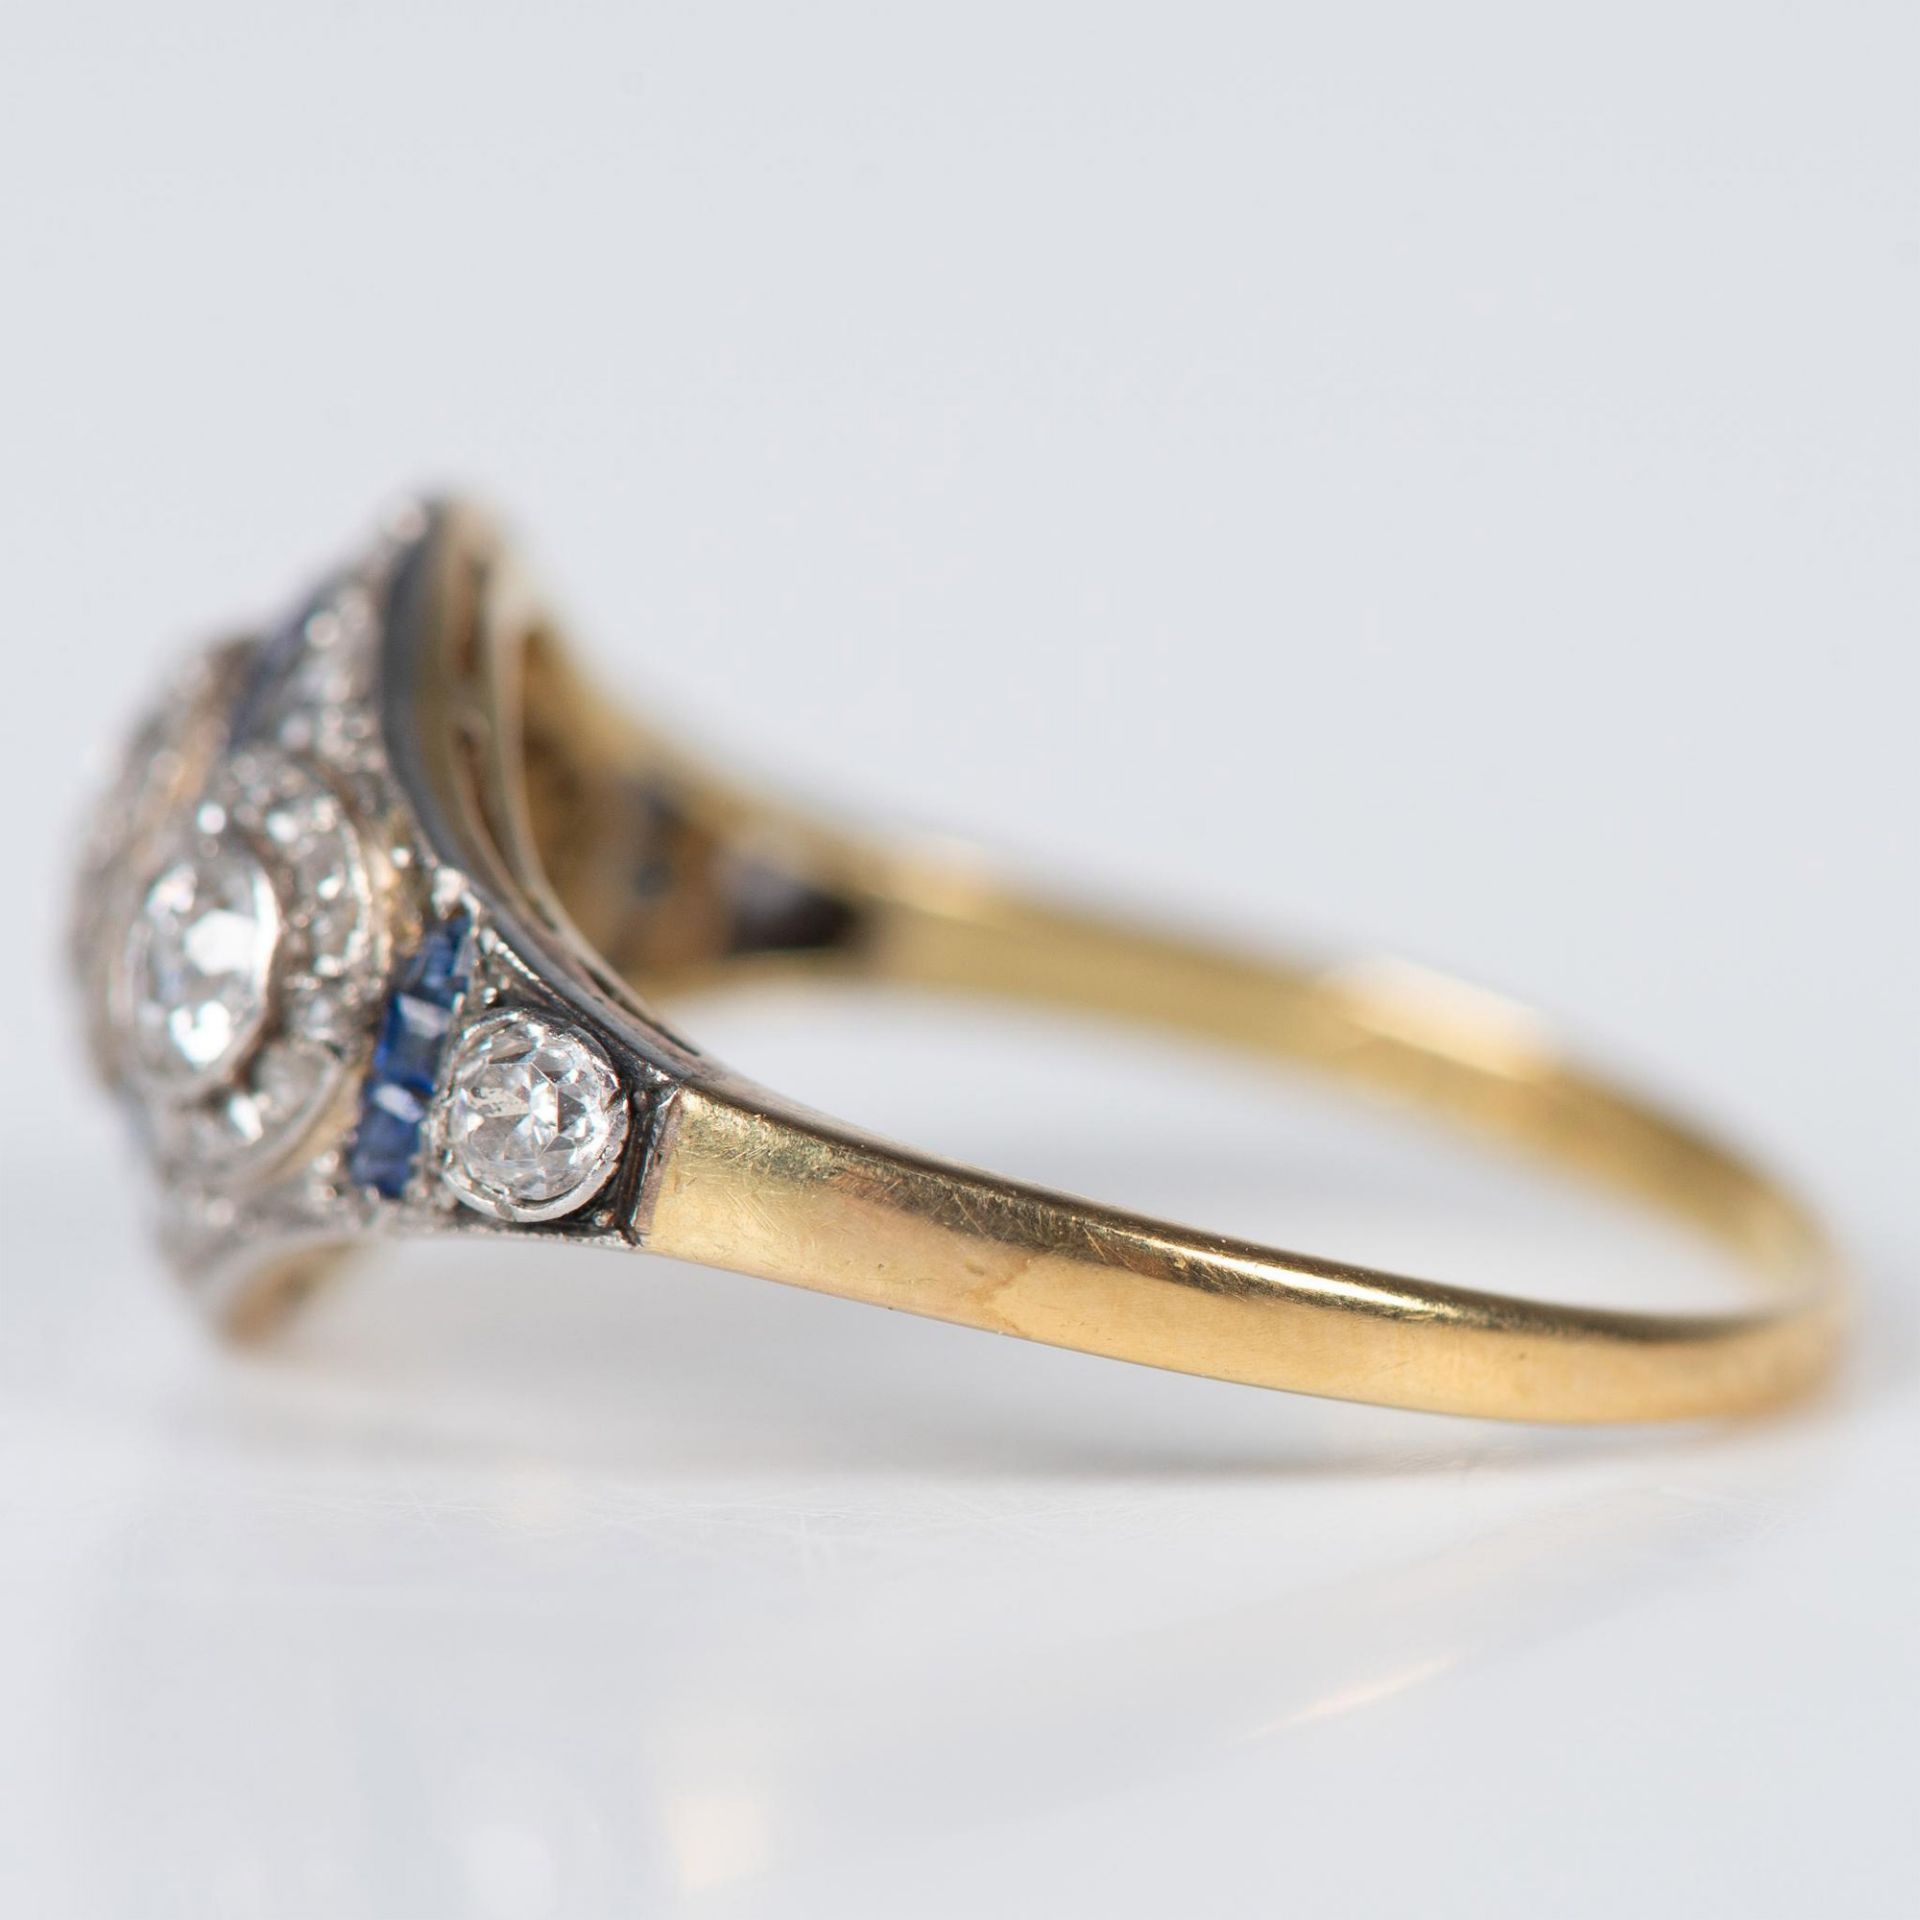 Art Deco 18K Gold, Diamonds and Sapphire Ring - Image 8 of 8